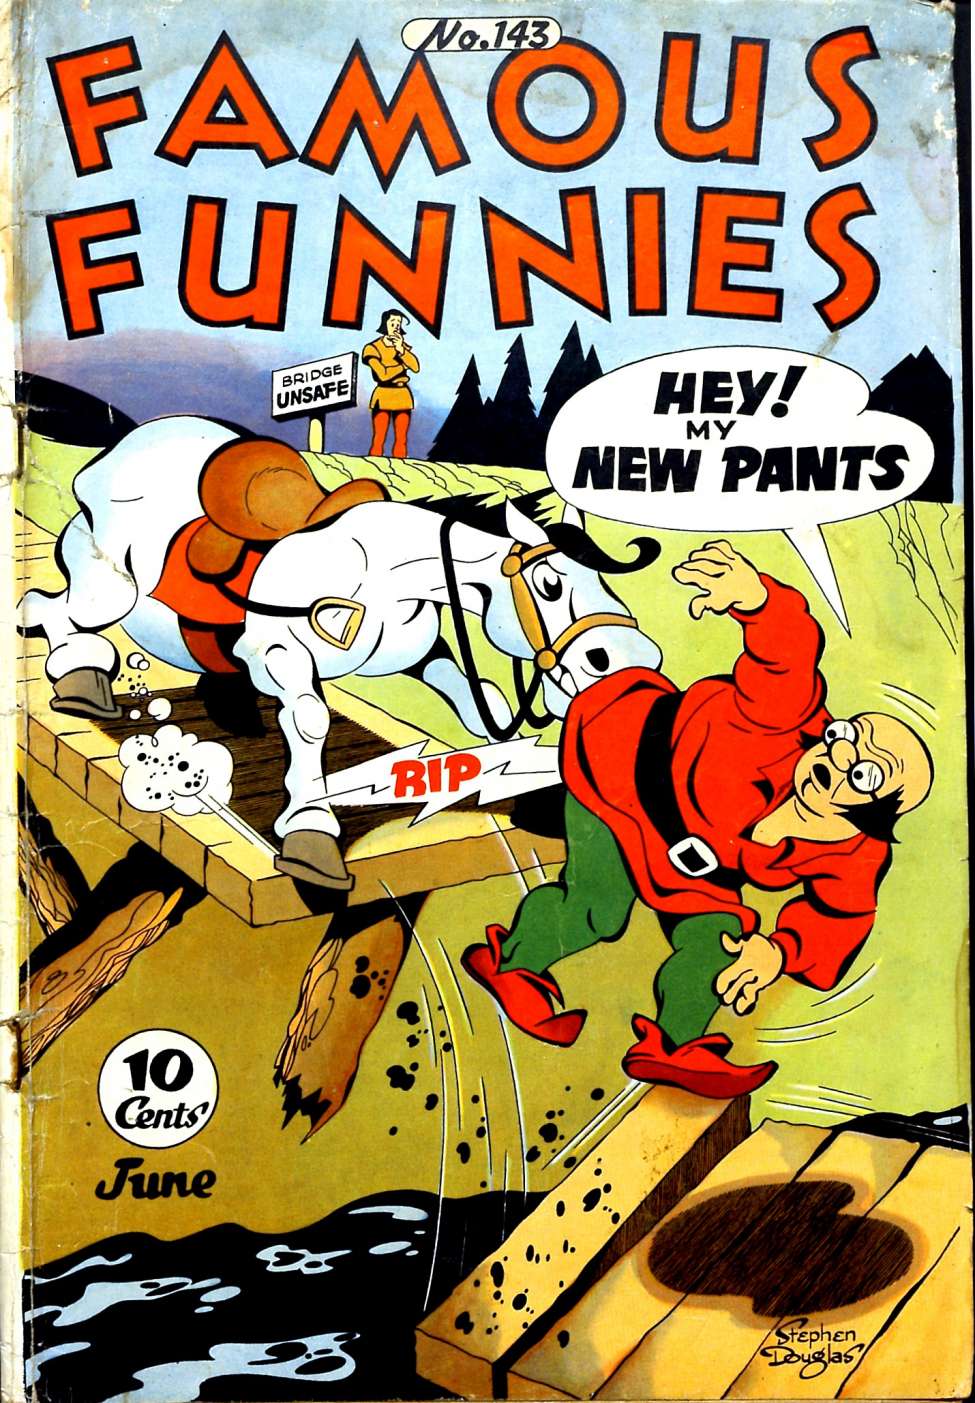 Book Cover For Famous Funnies 143